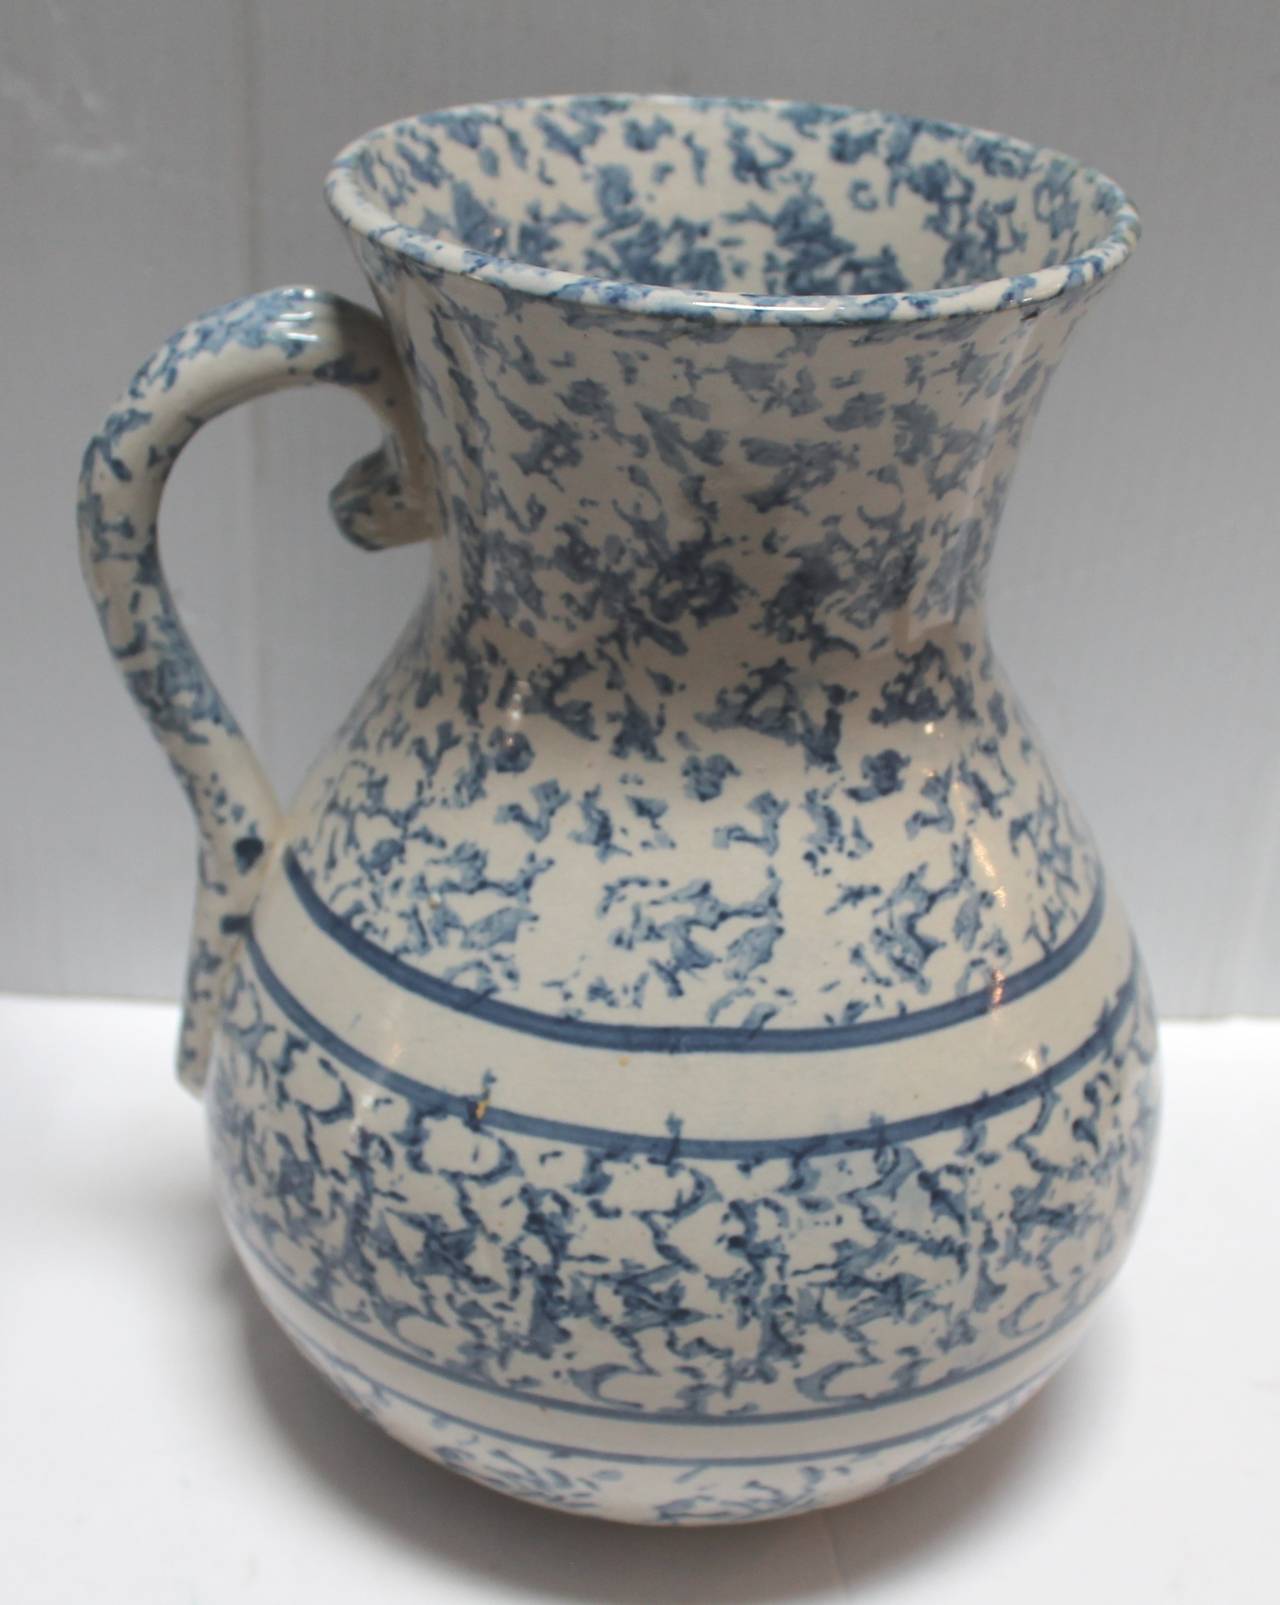 Wow this is a very big water pitcher or jug. This 19th century sponge ware pitcher has wonderful bands and pattern both inside and out. The condition is pristine and wonderful light blue colors. It is unsigned as all sponge ware pottery is unmarked.